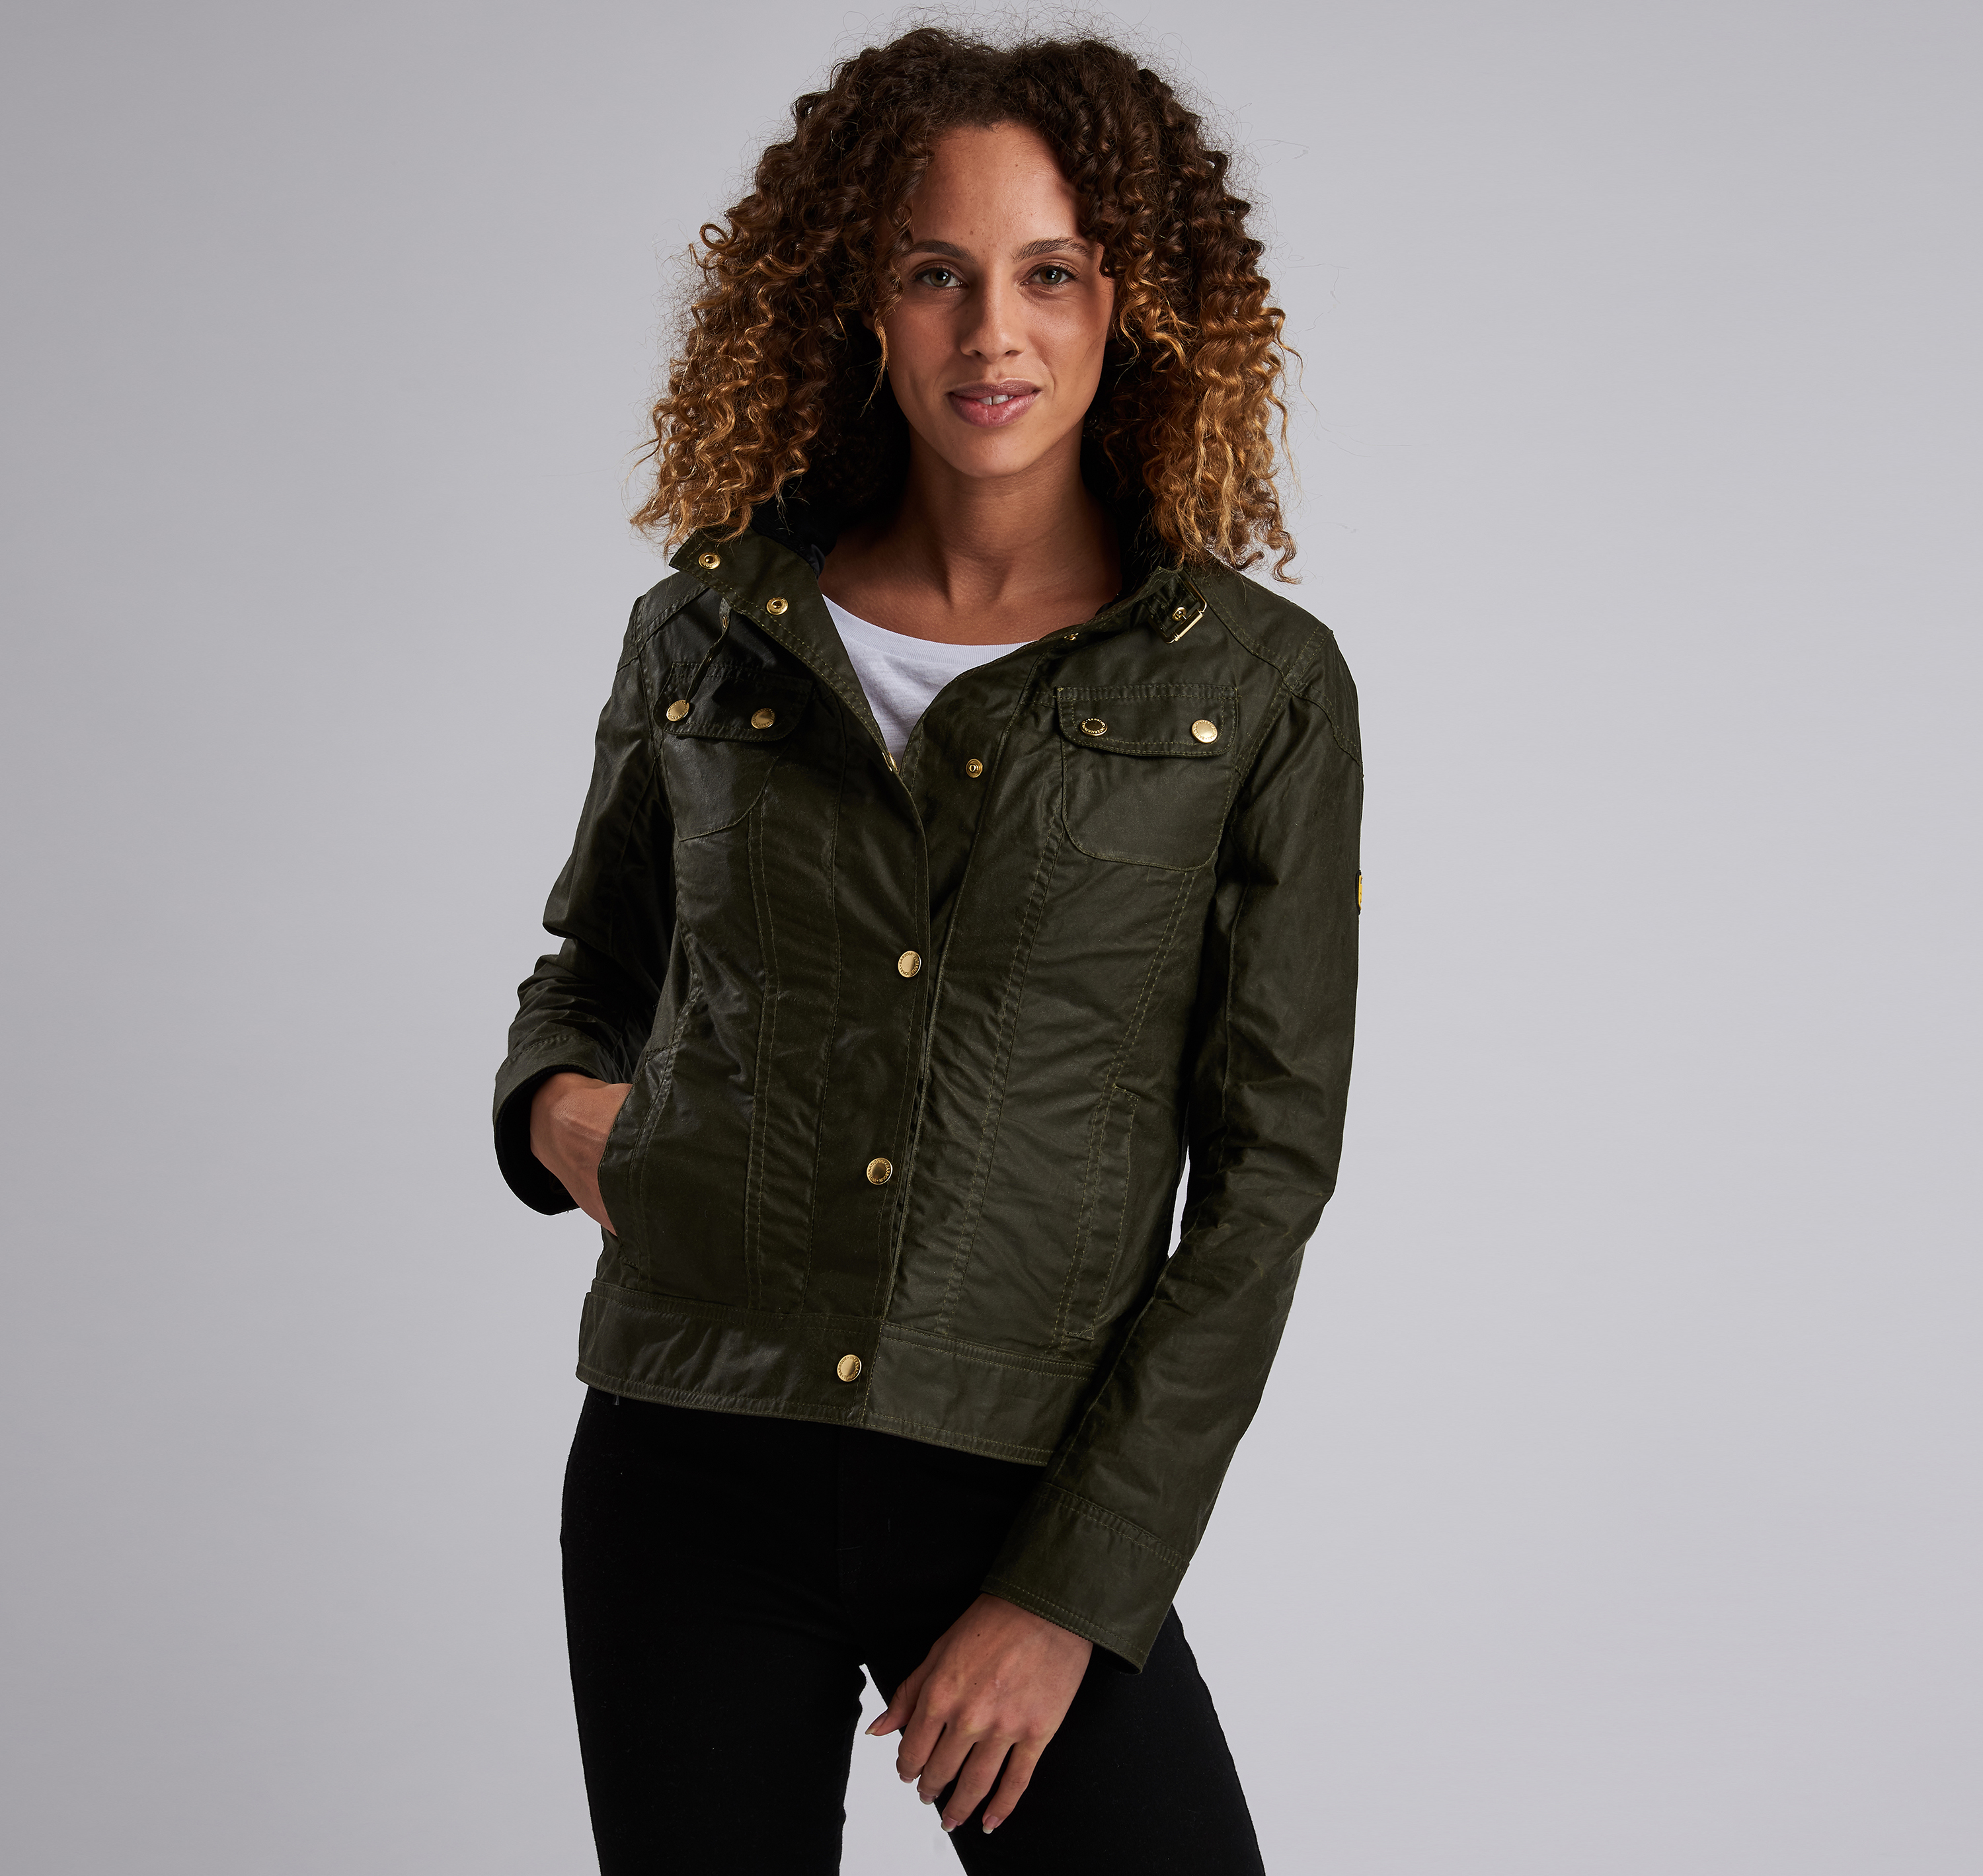 barbour pitch wax jacket